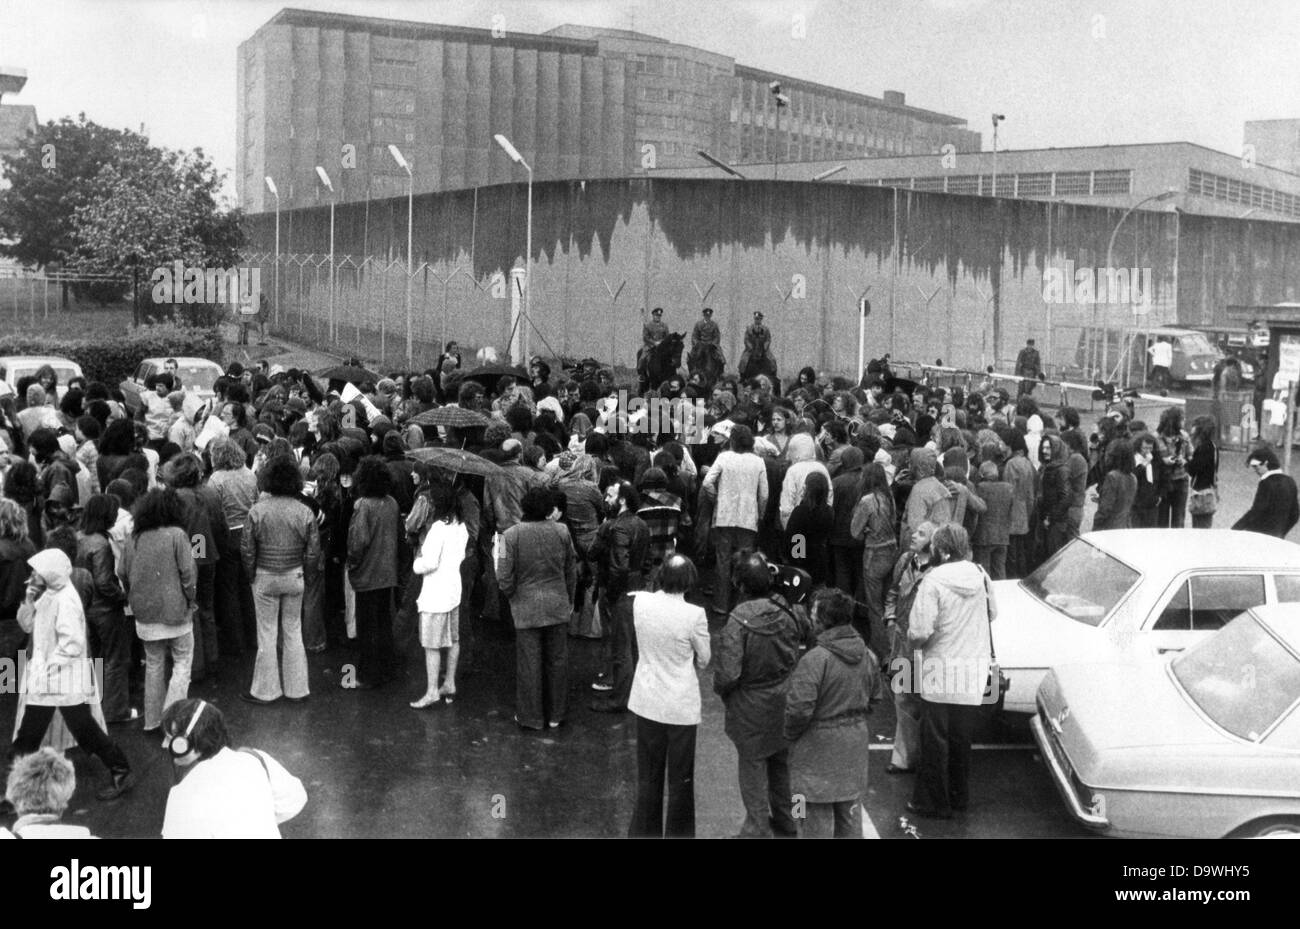 About 250 demonstrators have gathered in front of the prison in Stuttgart-Stammheim on the occasion of Ulrike Meinhof's death on the 11th of May in 1976. RAF terrorist Ulrike Meinhof committed suicide on the 5th of May in 1976. Stock Photo